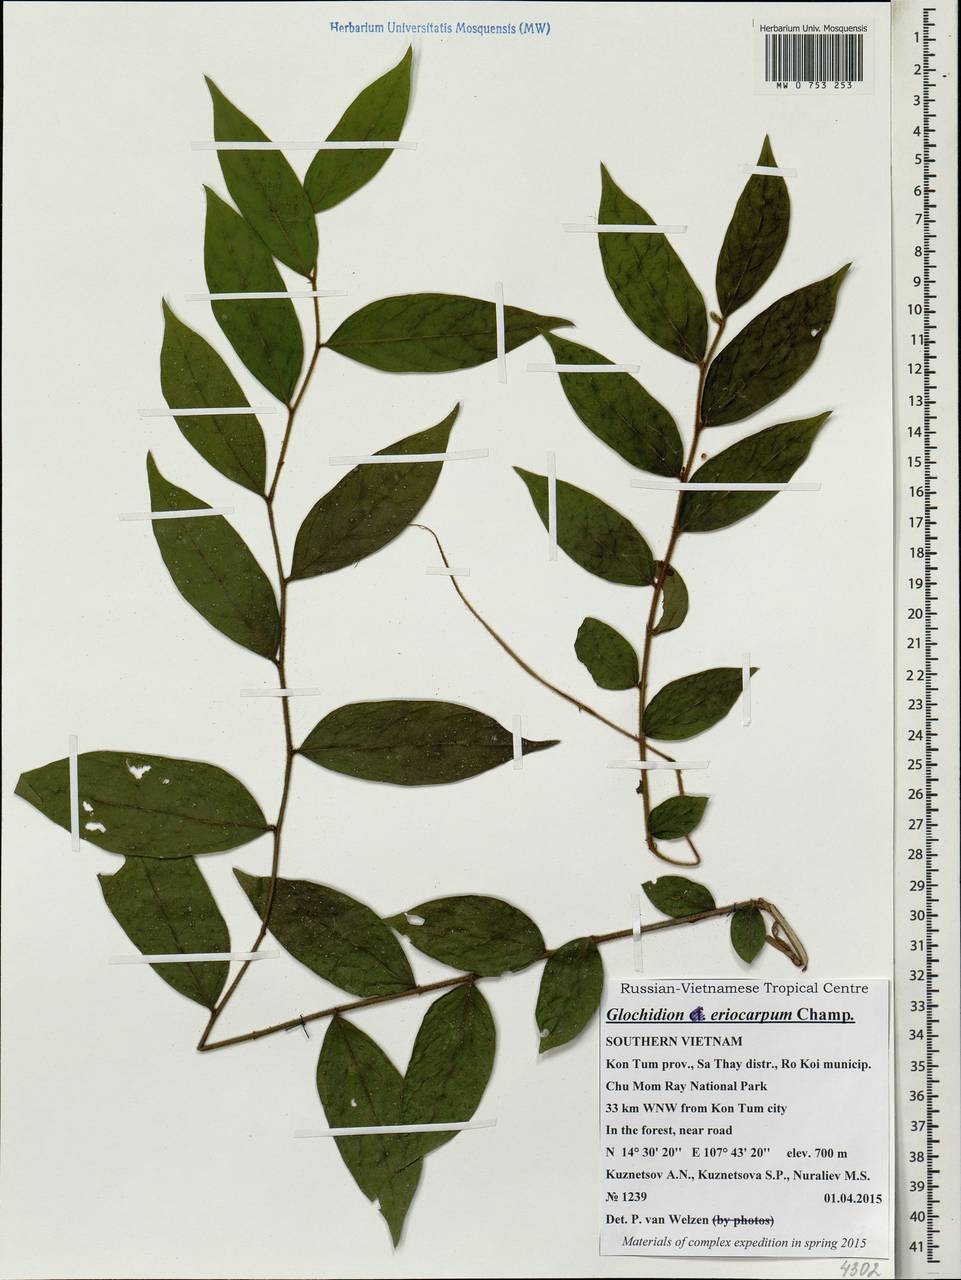 Phyllanthus eriocarpus (Champ. ex Benth.) Müll.Arg., South Asia, South Asia (Asia outside ex-Soviet states and Mongolia) (ASIA) (Vietnam)